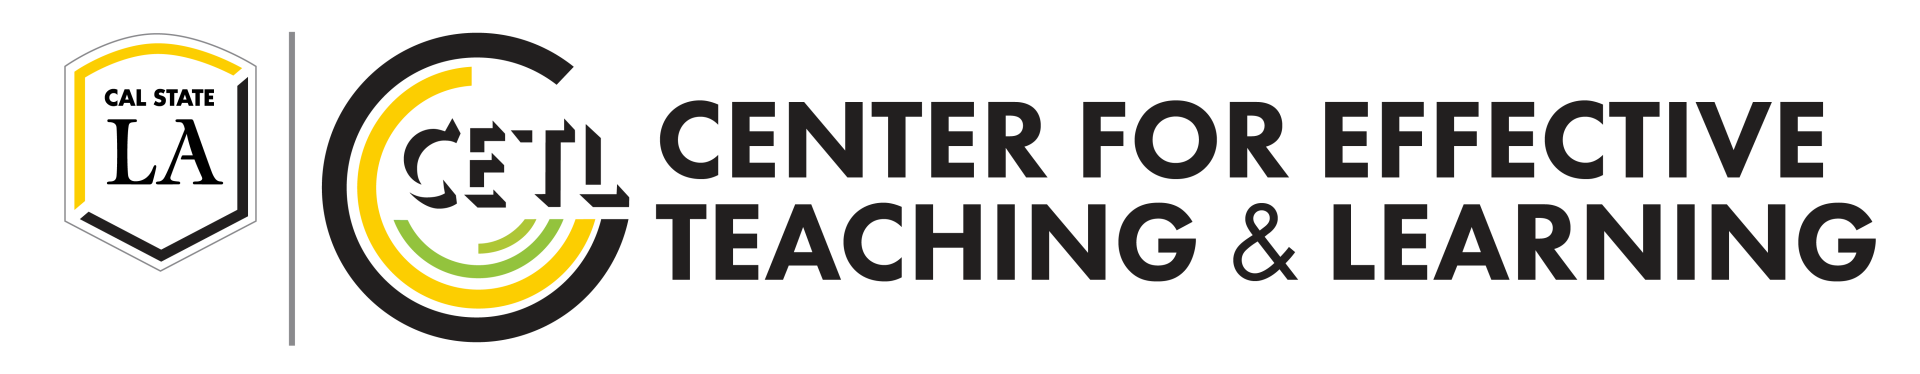 Center for Effective Teaching and Learning